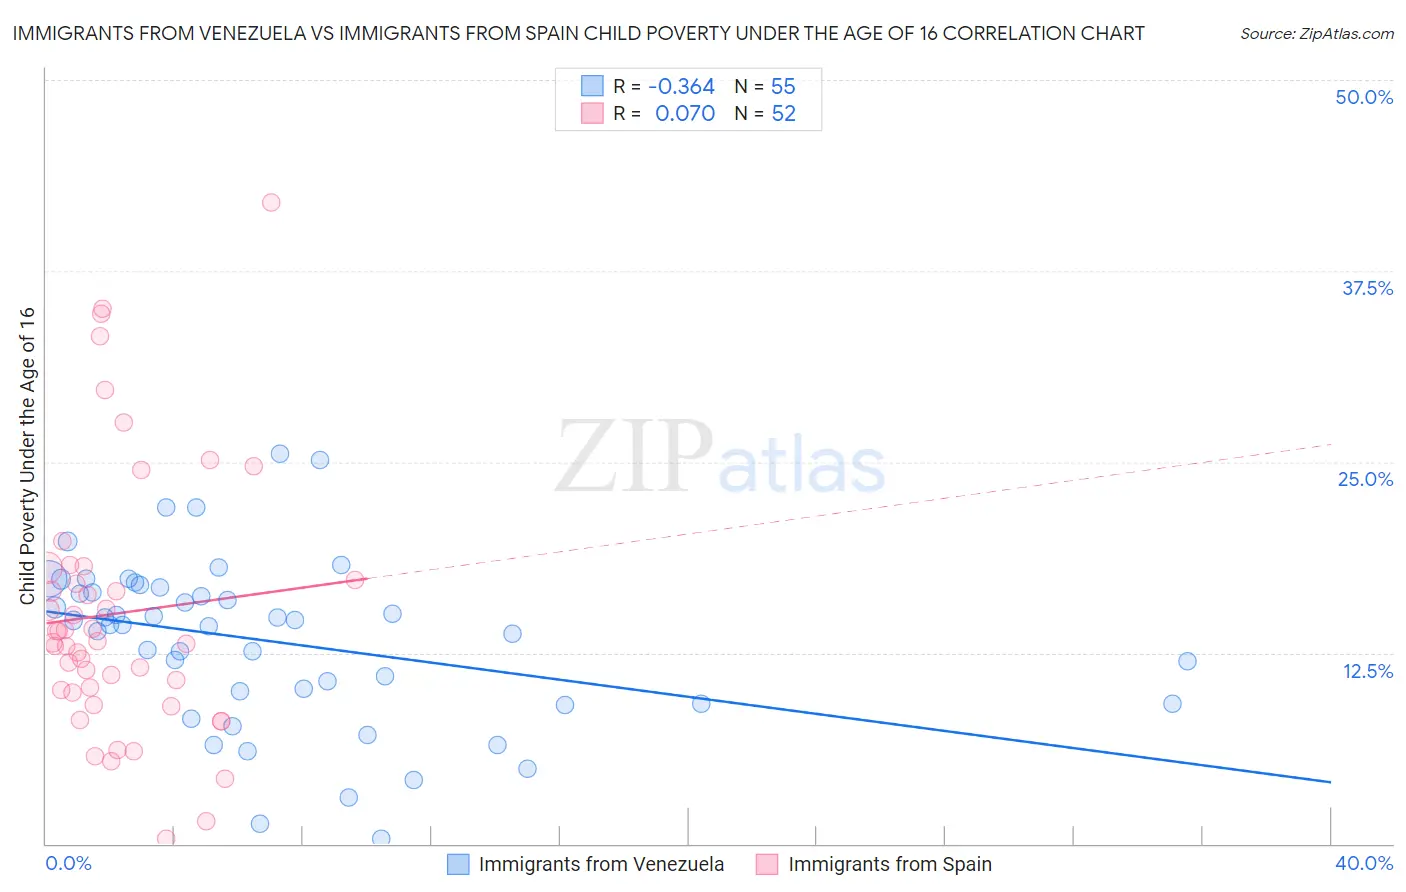 Immigrants from Venezuela vs Immigrants from Spain Child Poverty Under the Age of 16